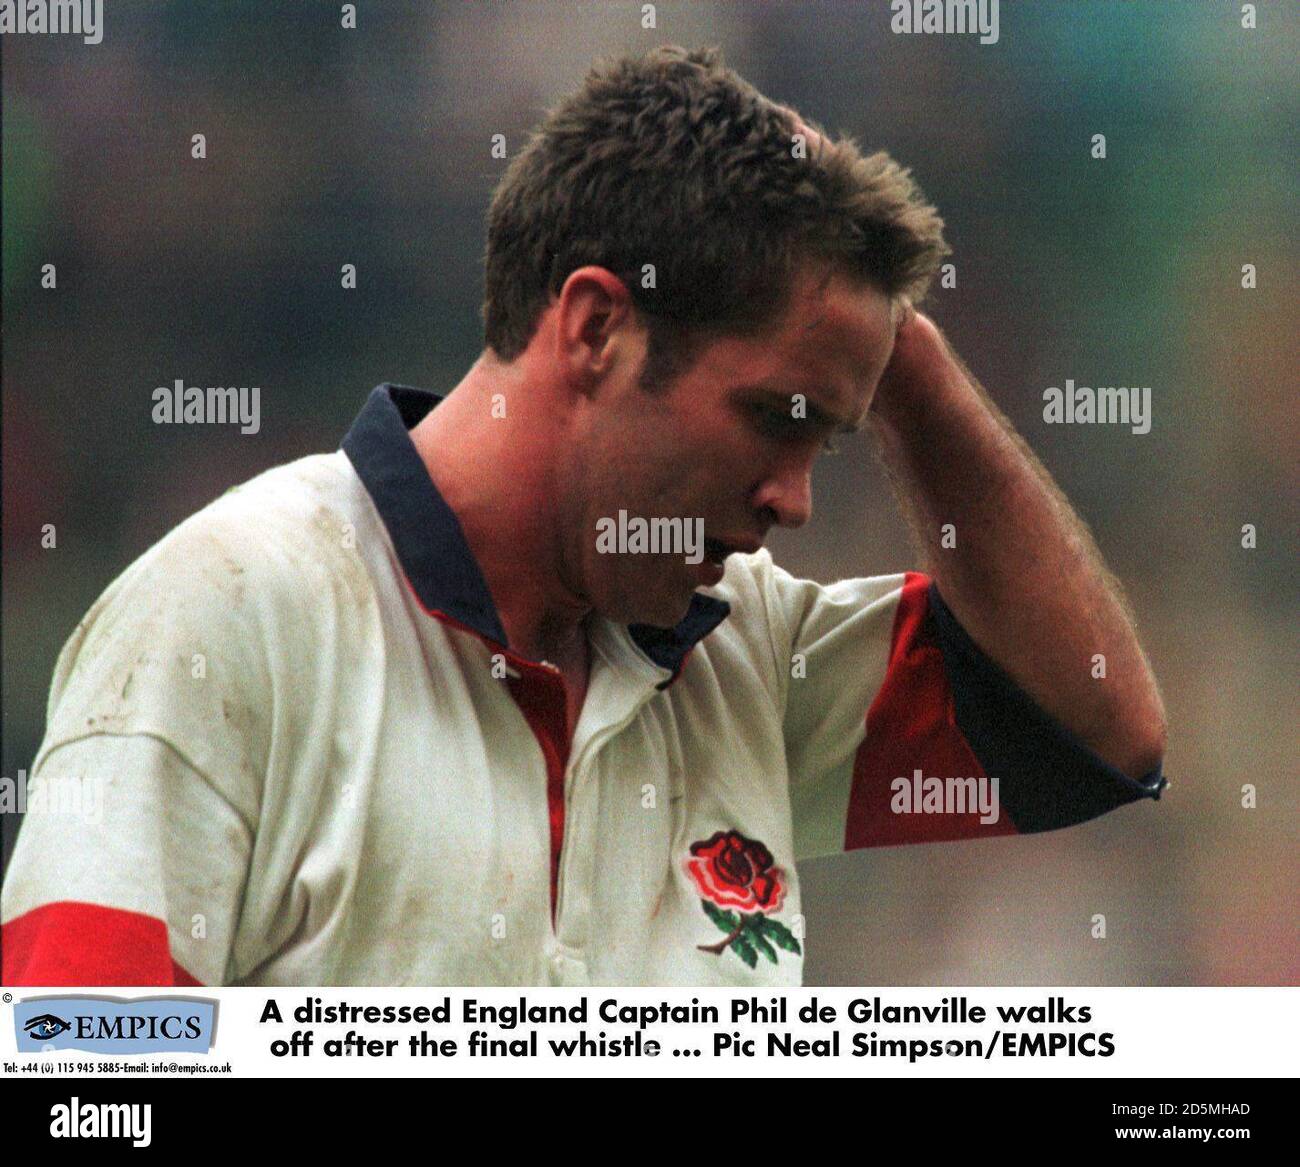 A distressed England Captain Phil de Glanville walks off after the final whistle Stock Photo